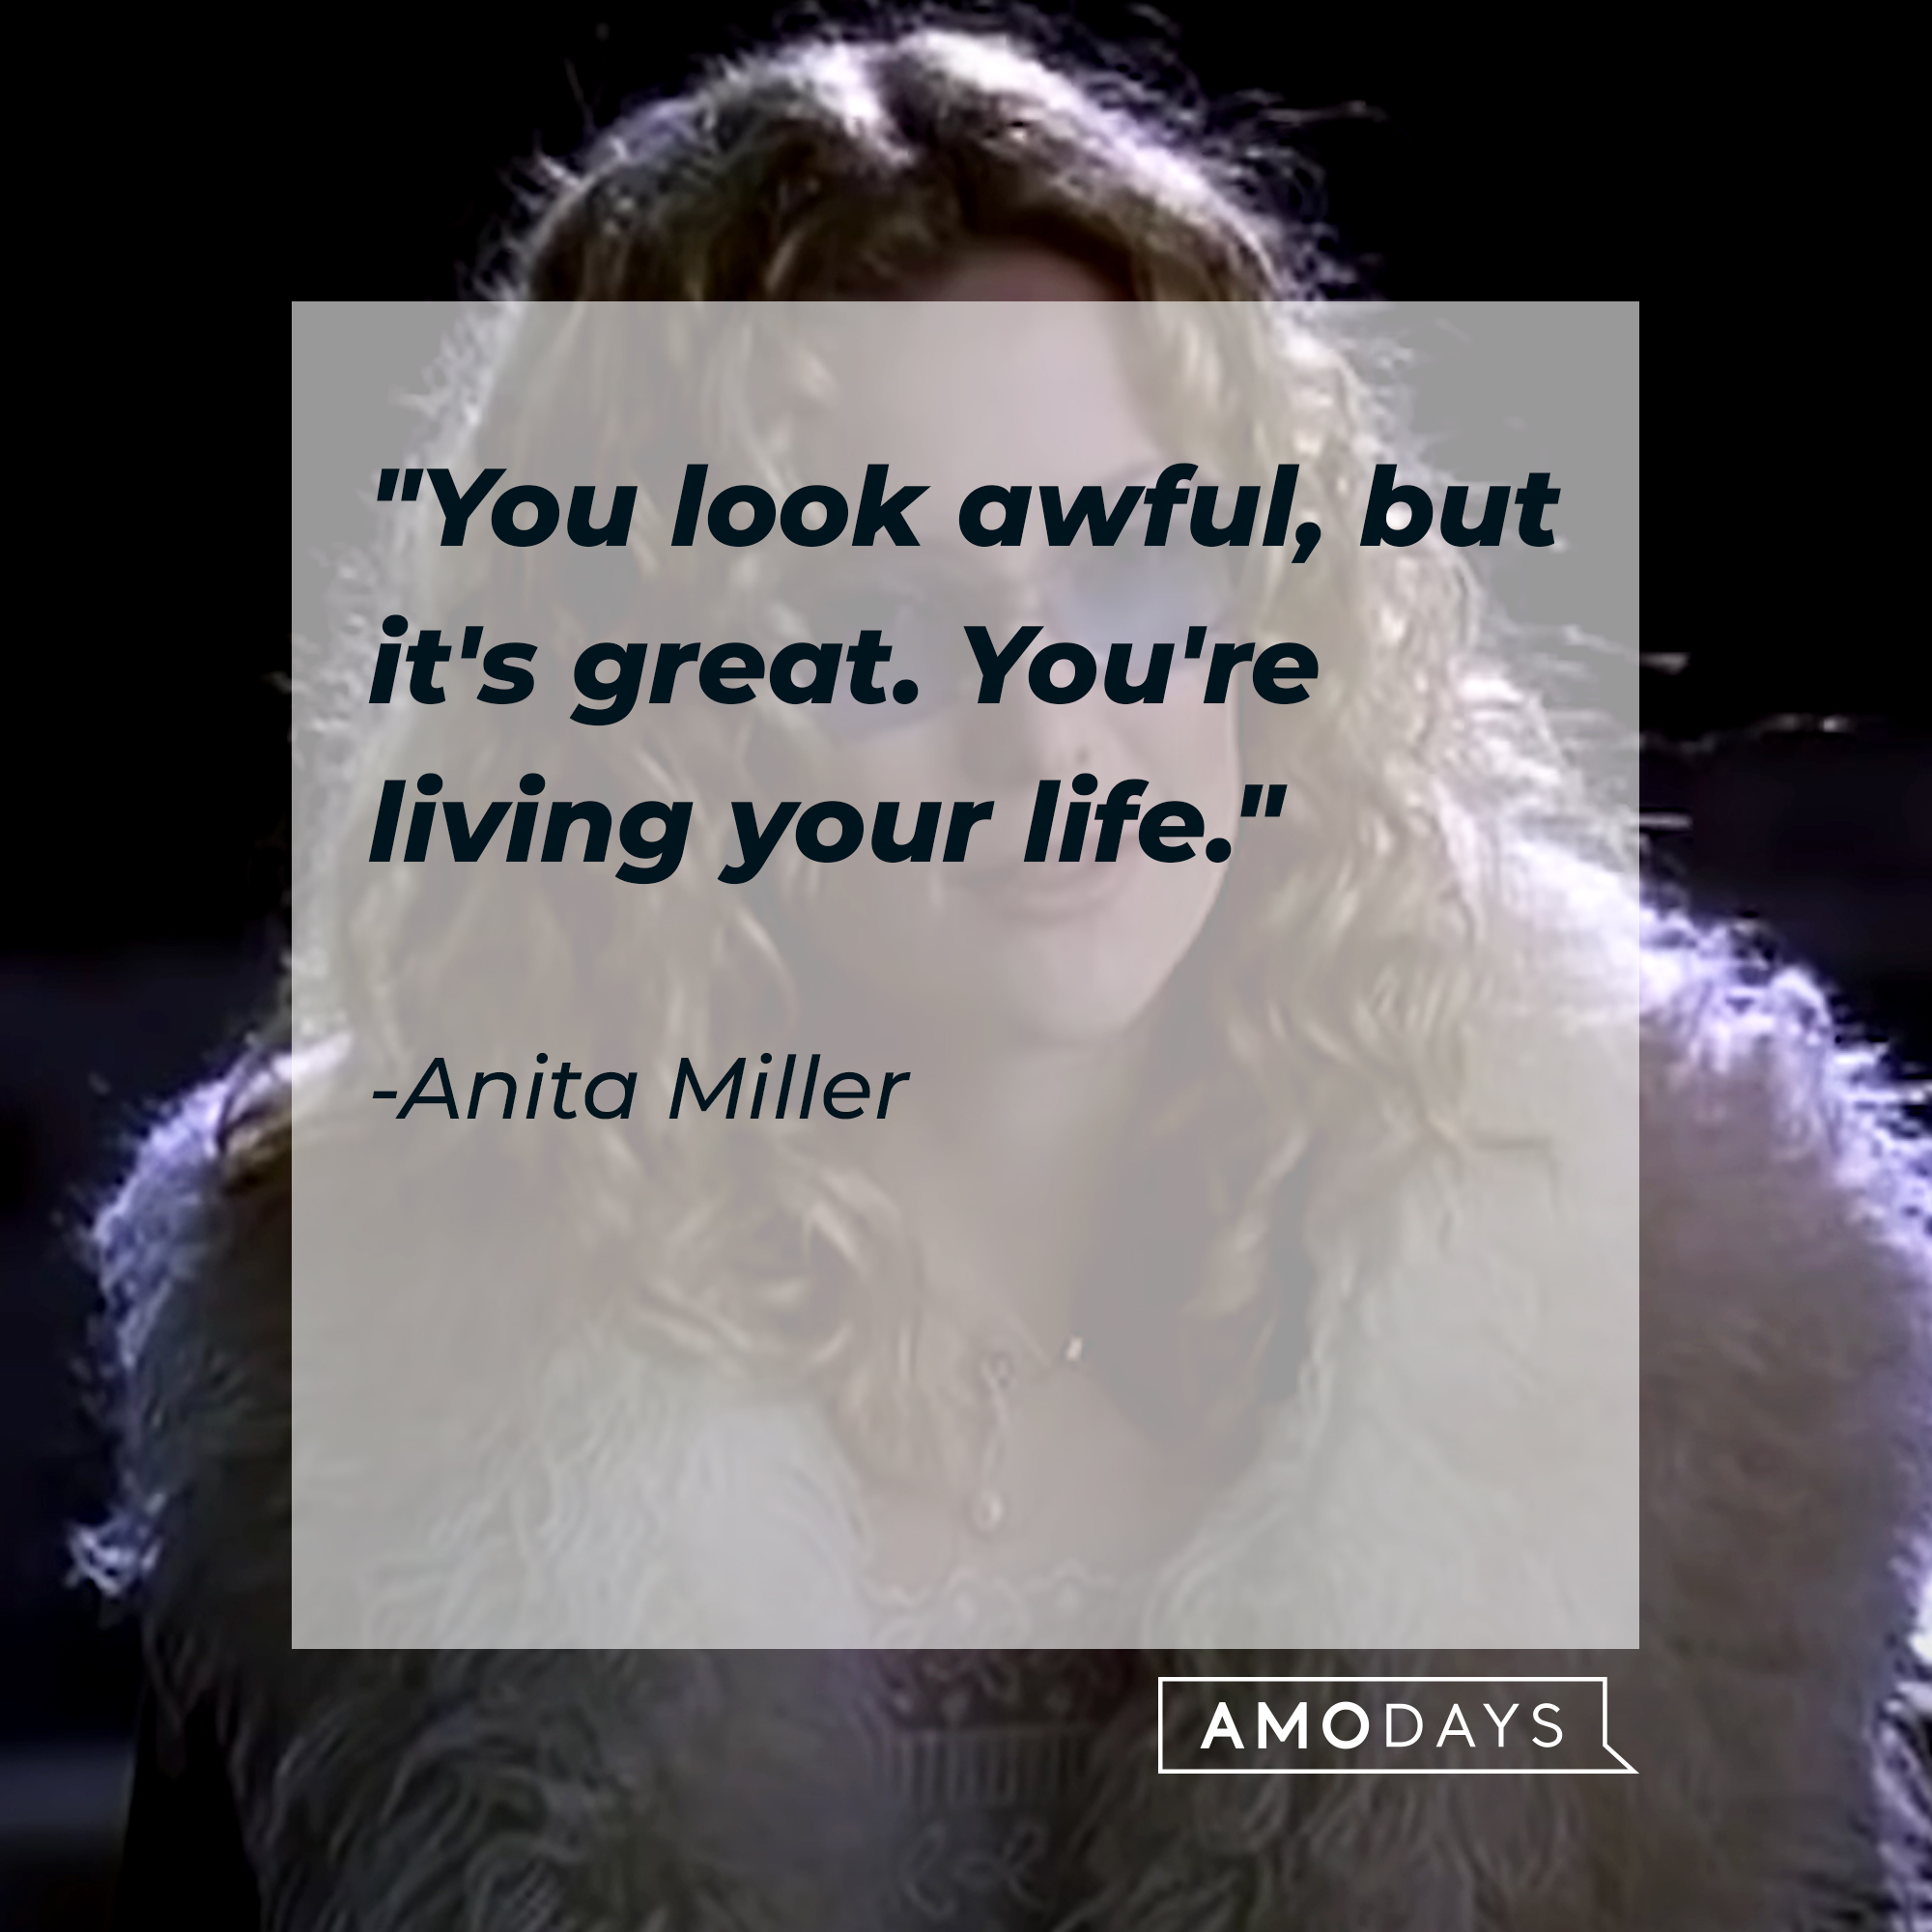 Anita Miller's quote: "You look awful, but it's great. You're living your life." | Source: Facebook/AlmostFamousTheMovie